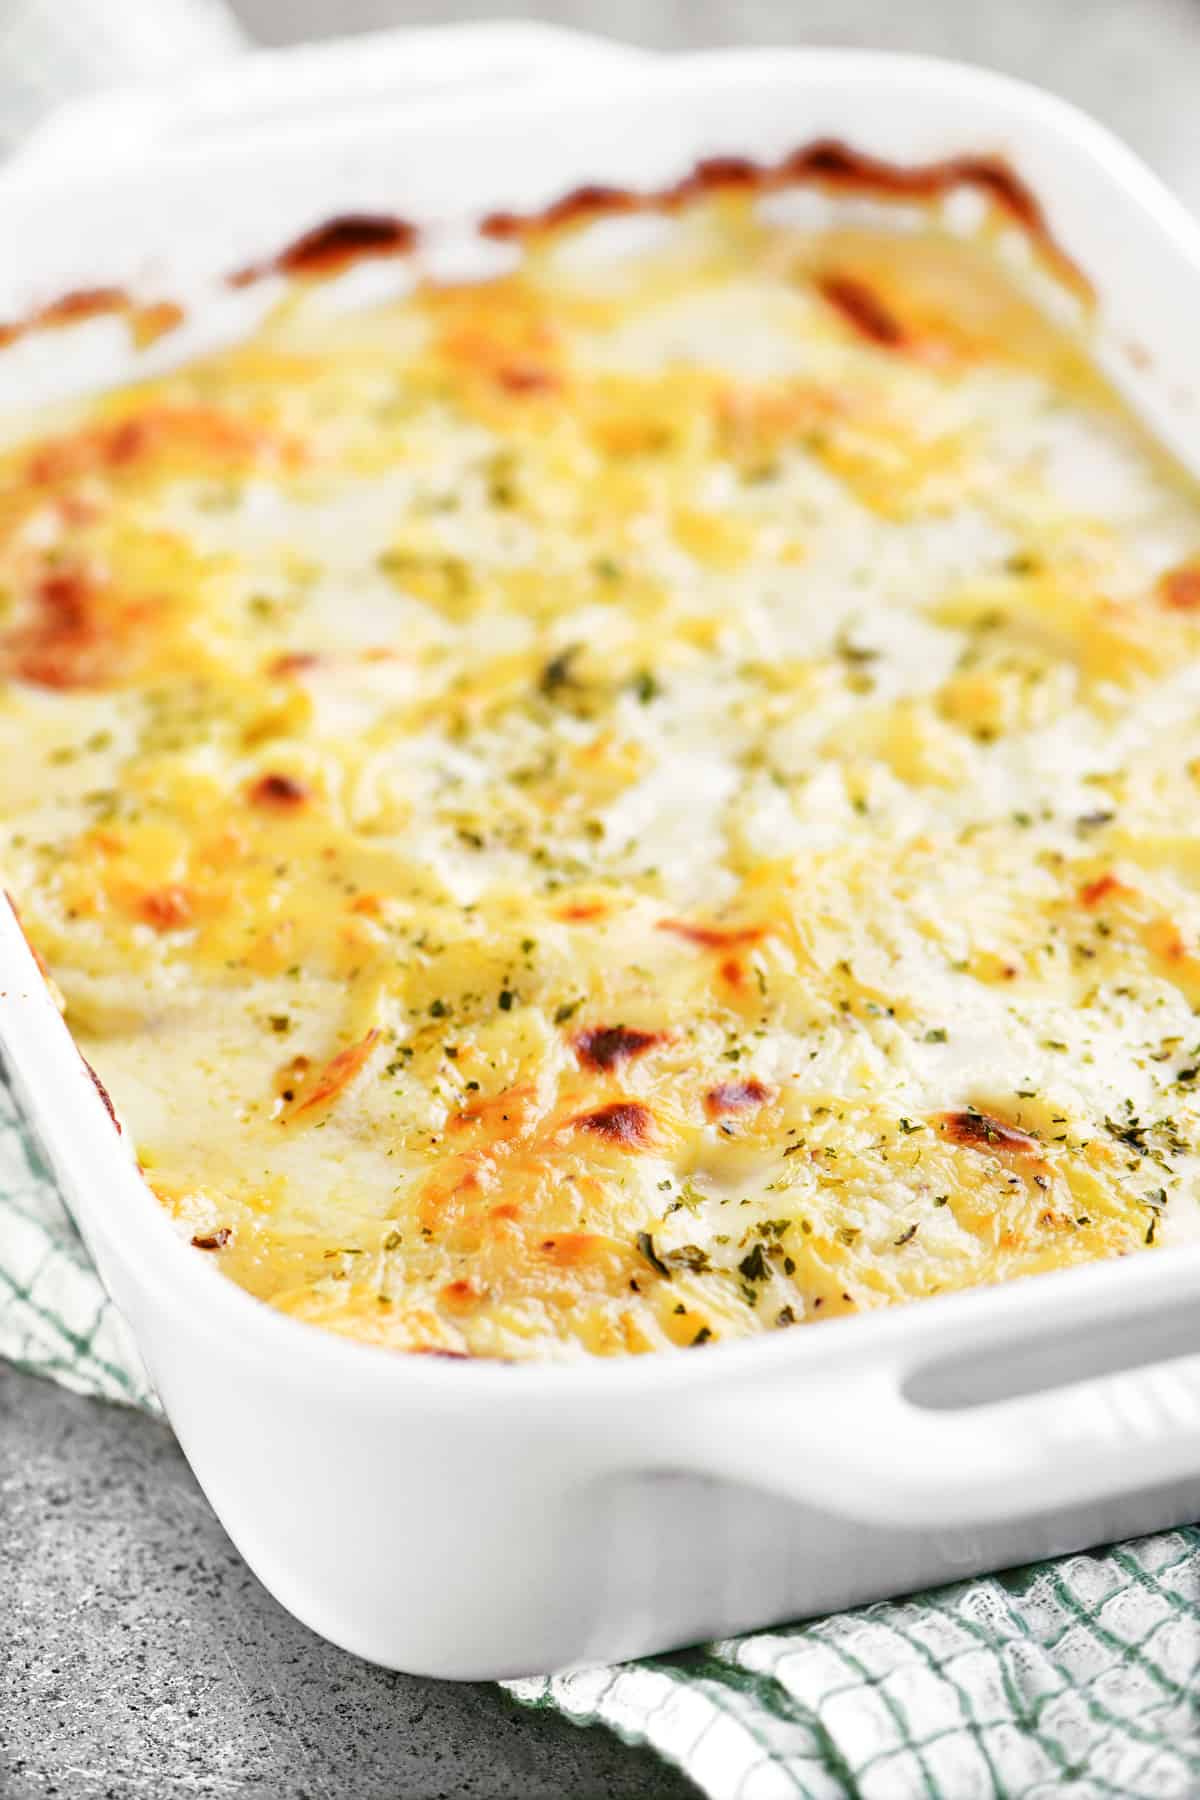 Casserole dish of cooked scalloped potatoes.